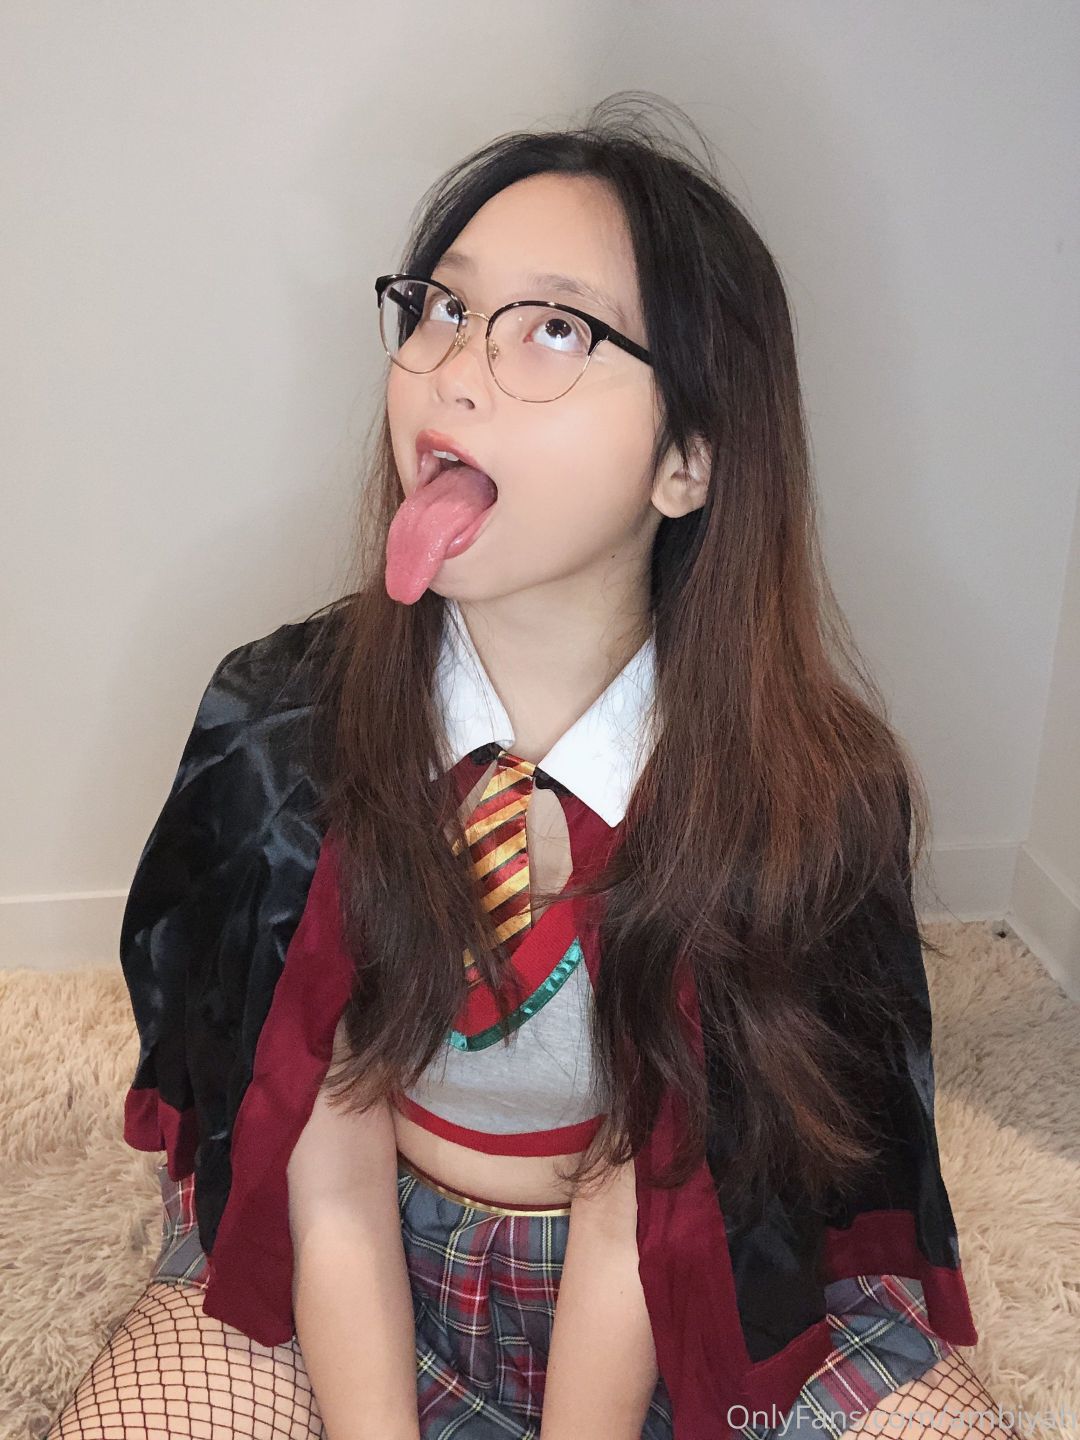 AsianOnlyfans 72 092 1008 20220225